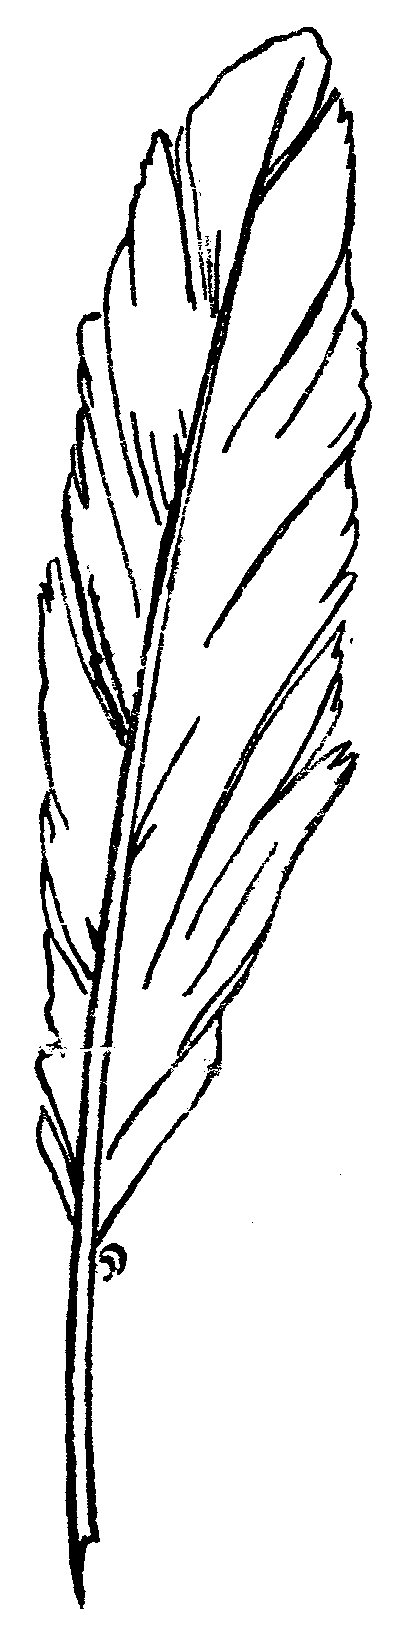 Quill.png - ClipArt Best